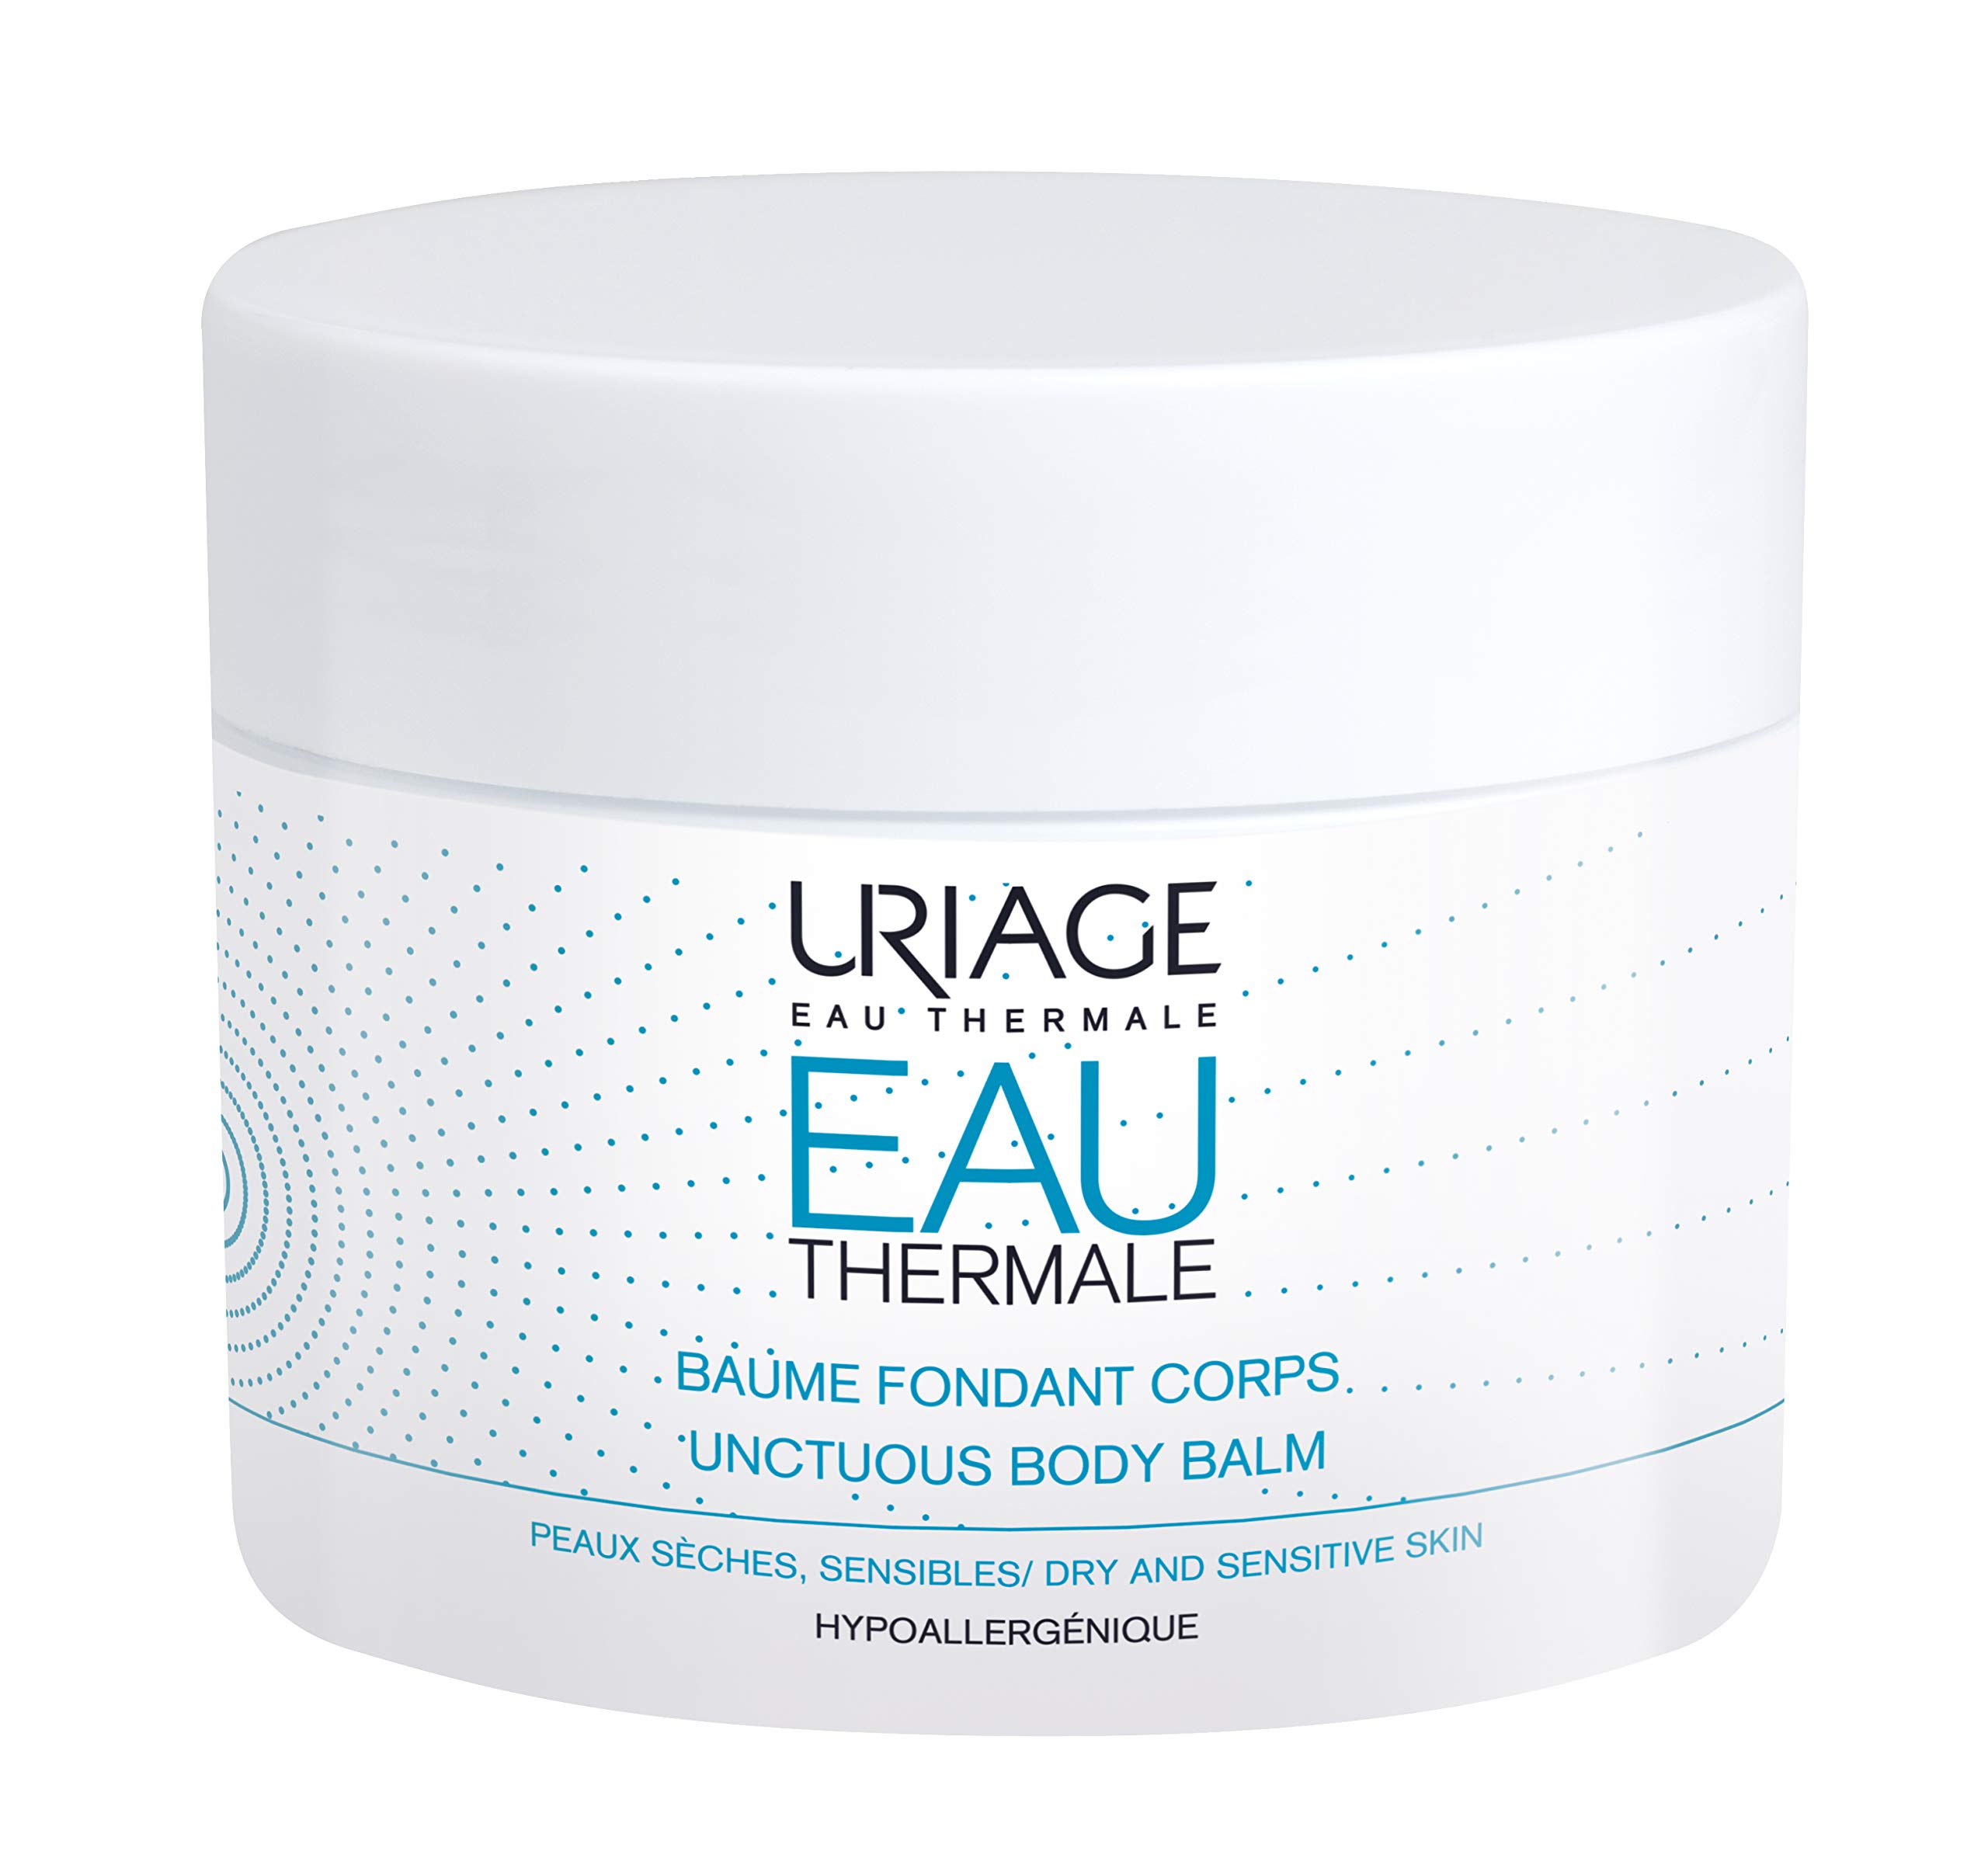 URIAGE Thermal Water Unctuous Body Balm 6.8 fl.oz. | Hydrating Body Moisturizer with Hyaluronic Acid and Shea Butter for Dry To Extra Dry Skin | Nourishes and Improves firmness of the Skin for 24hr